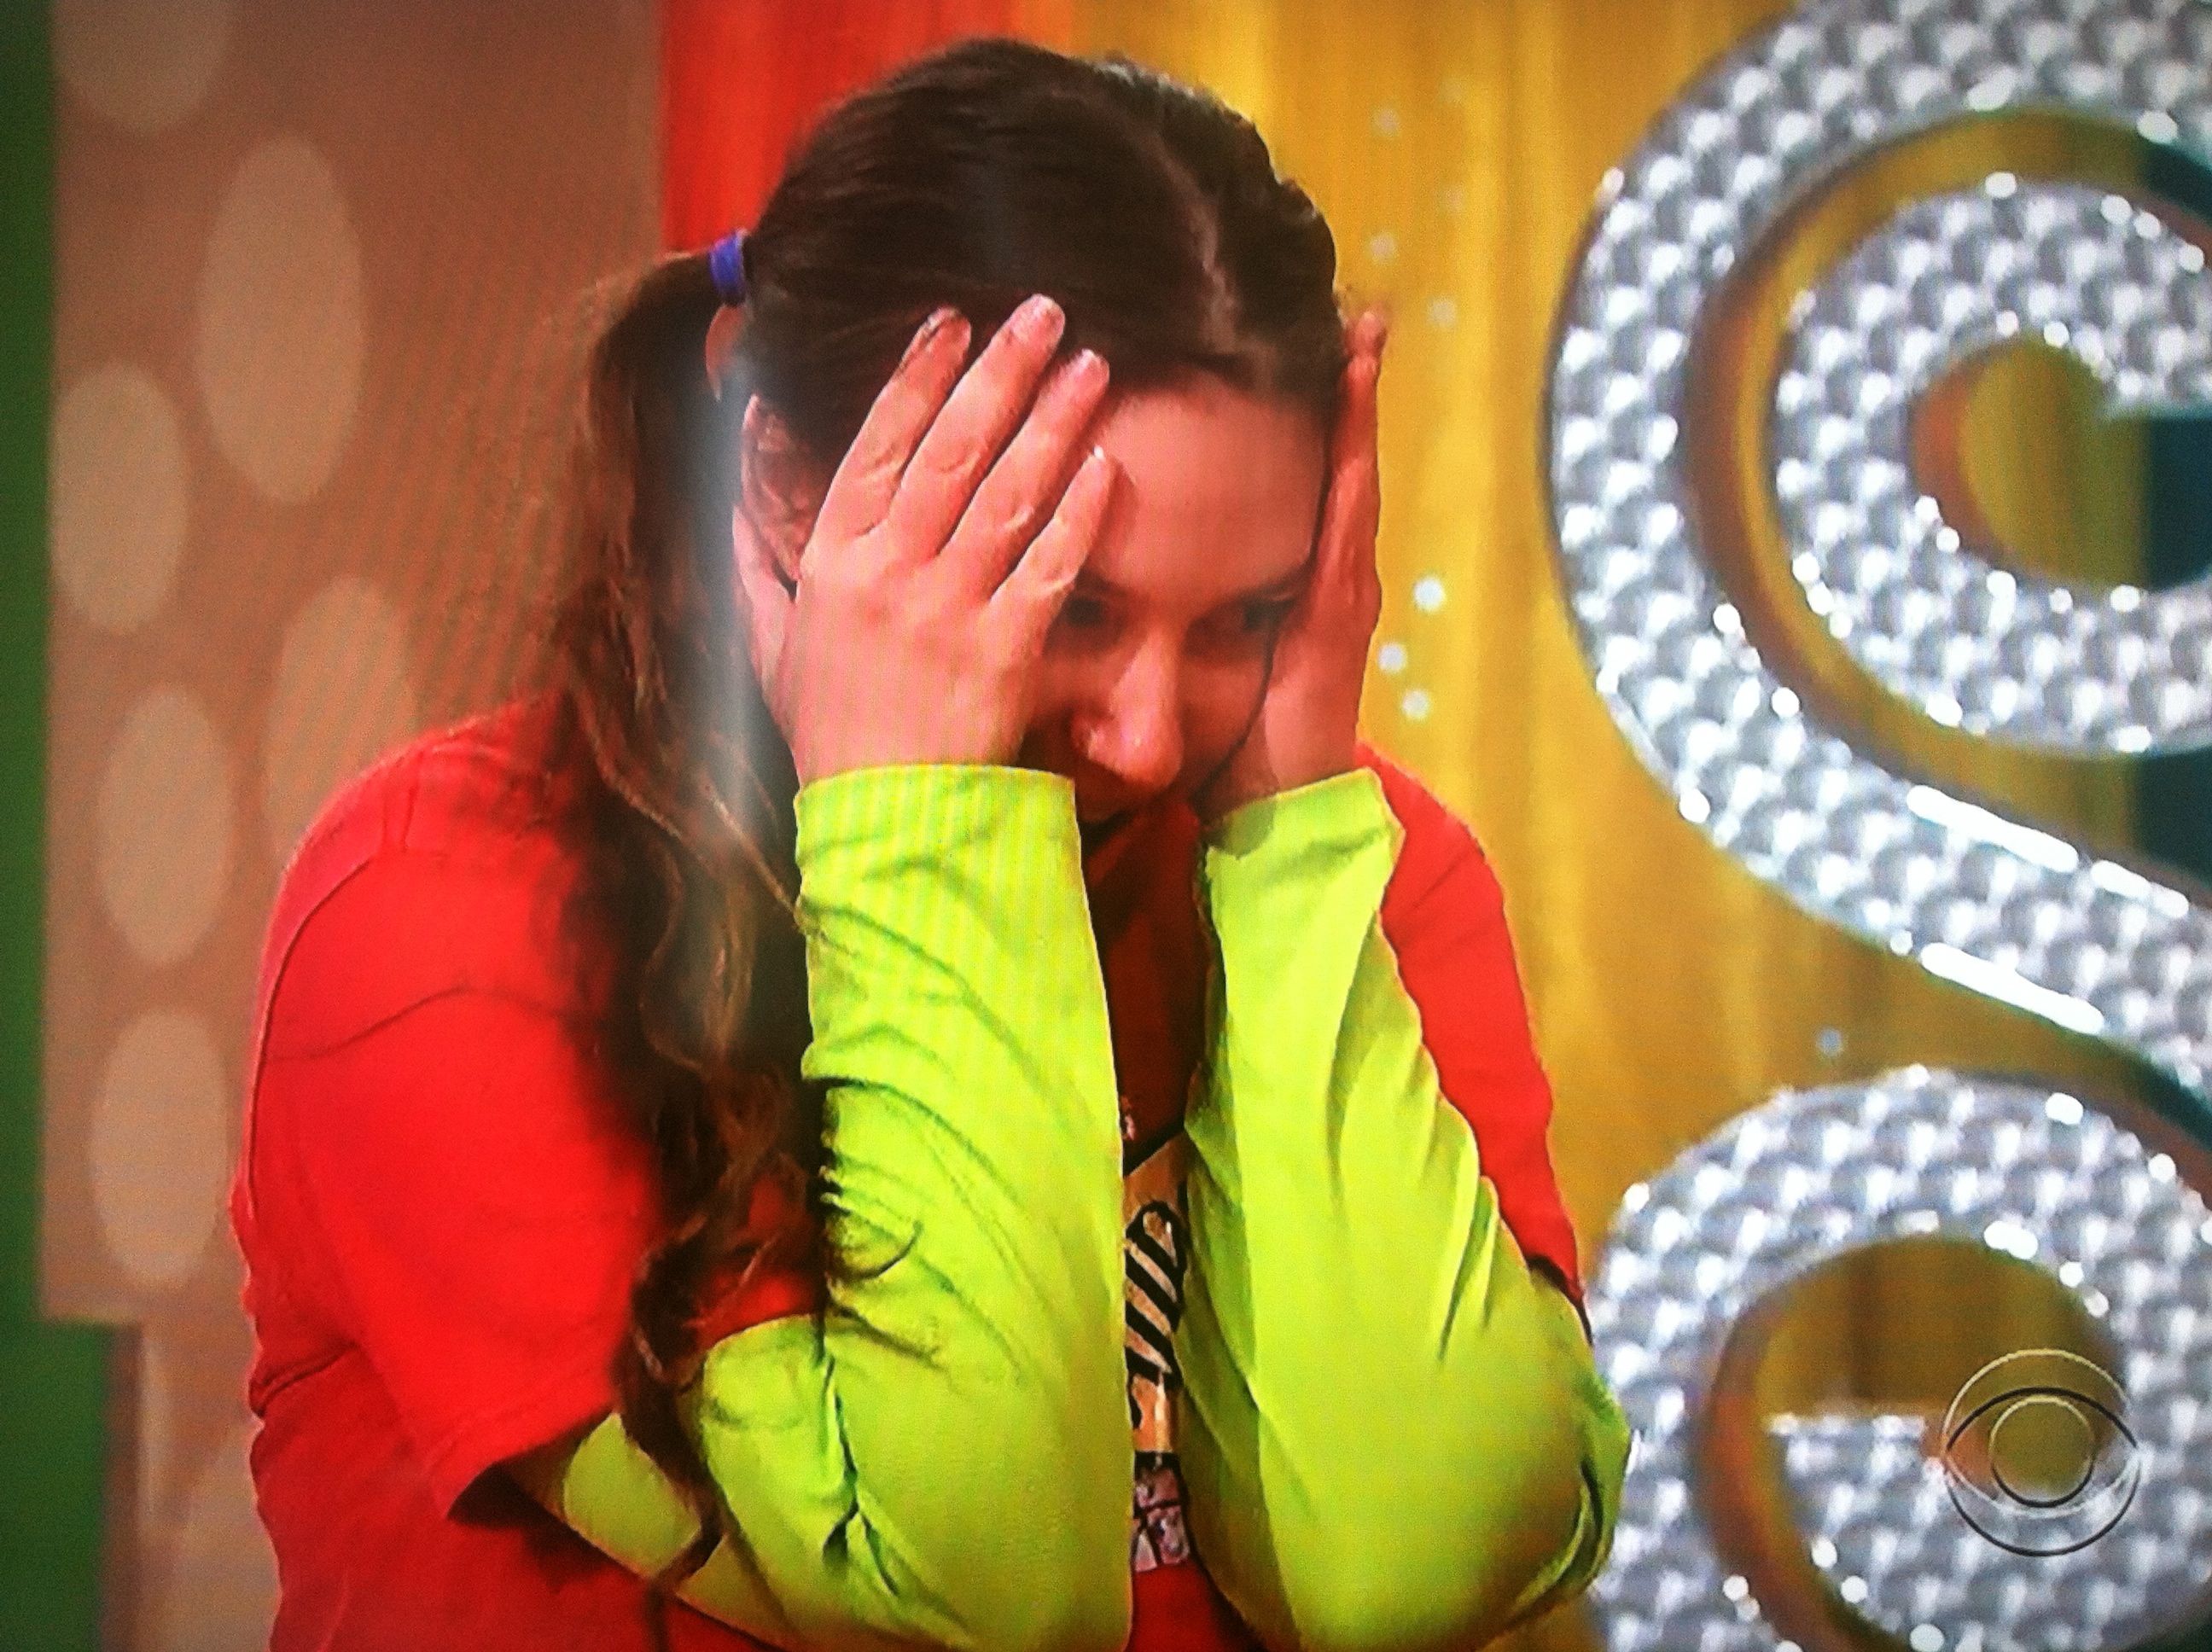 Aurora De Lucia, stressed, head in hands, on The Price is Right after narrowly missing a dollar